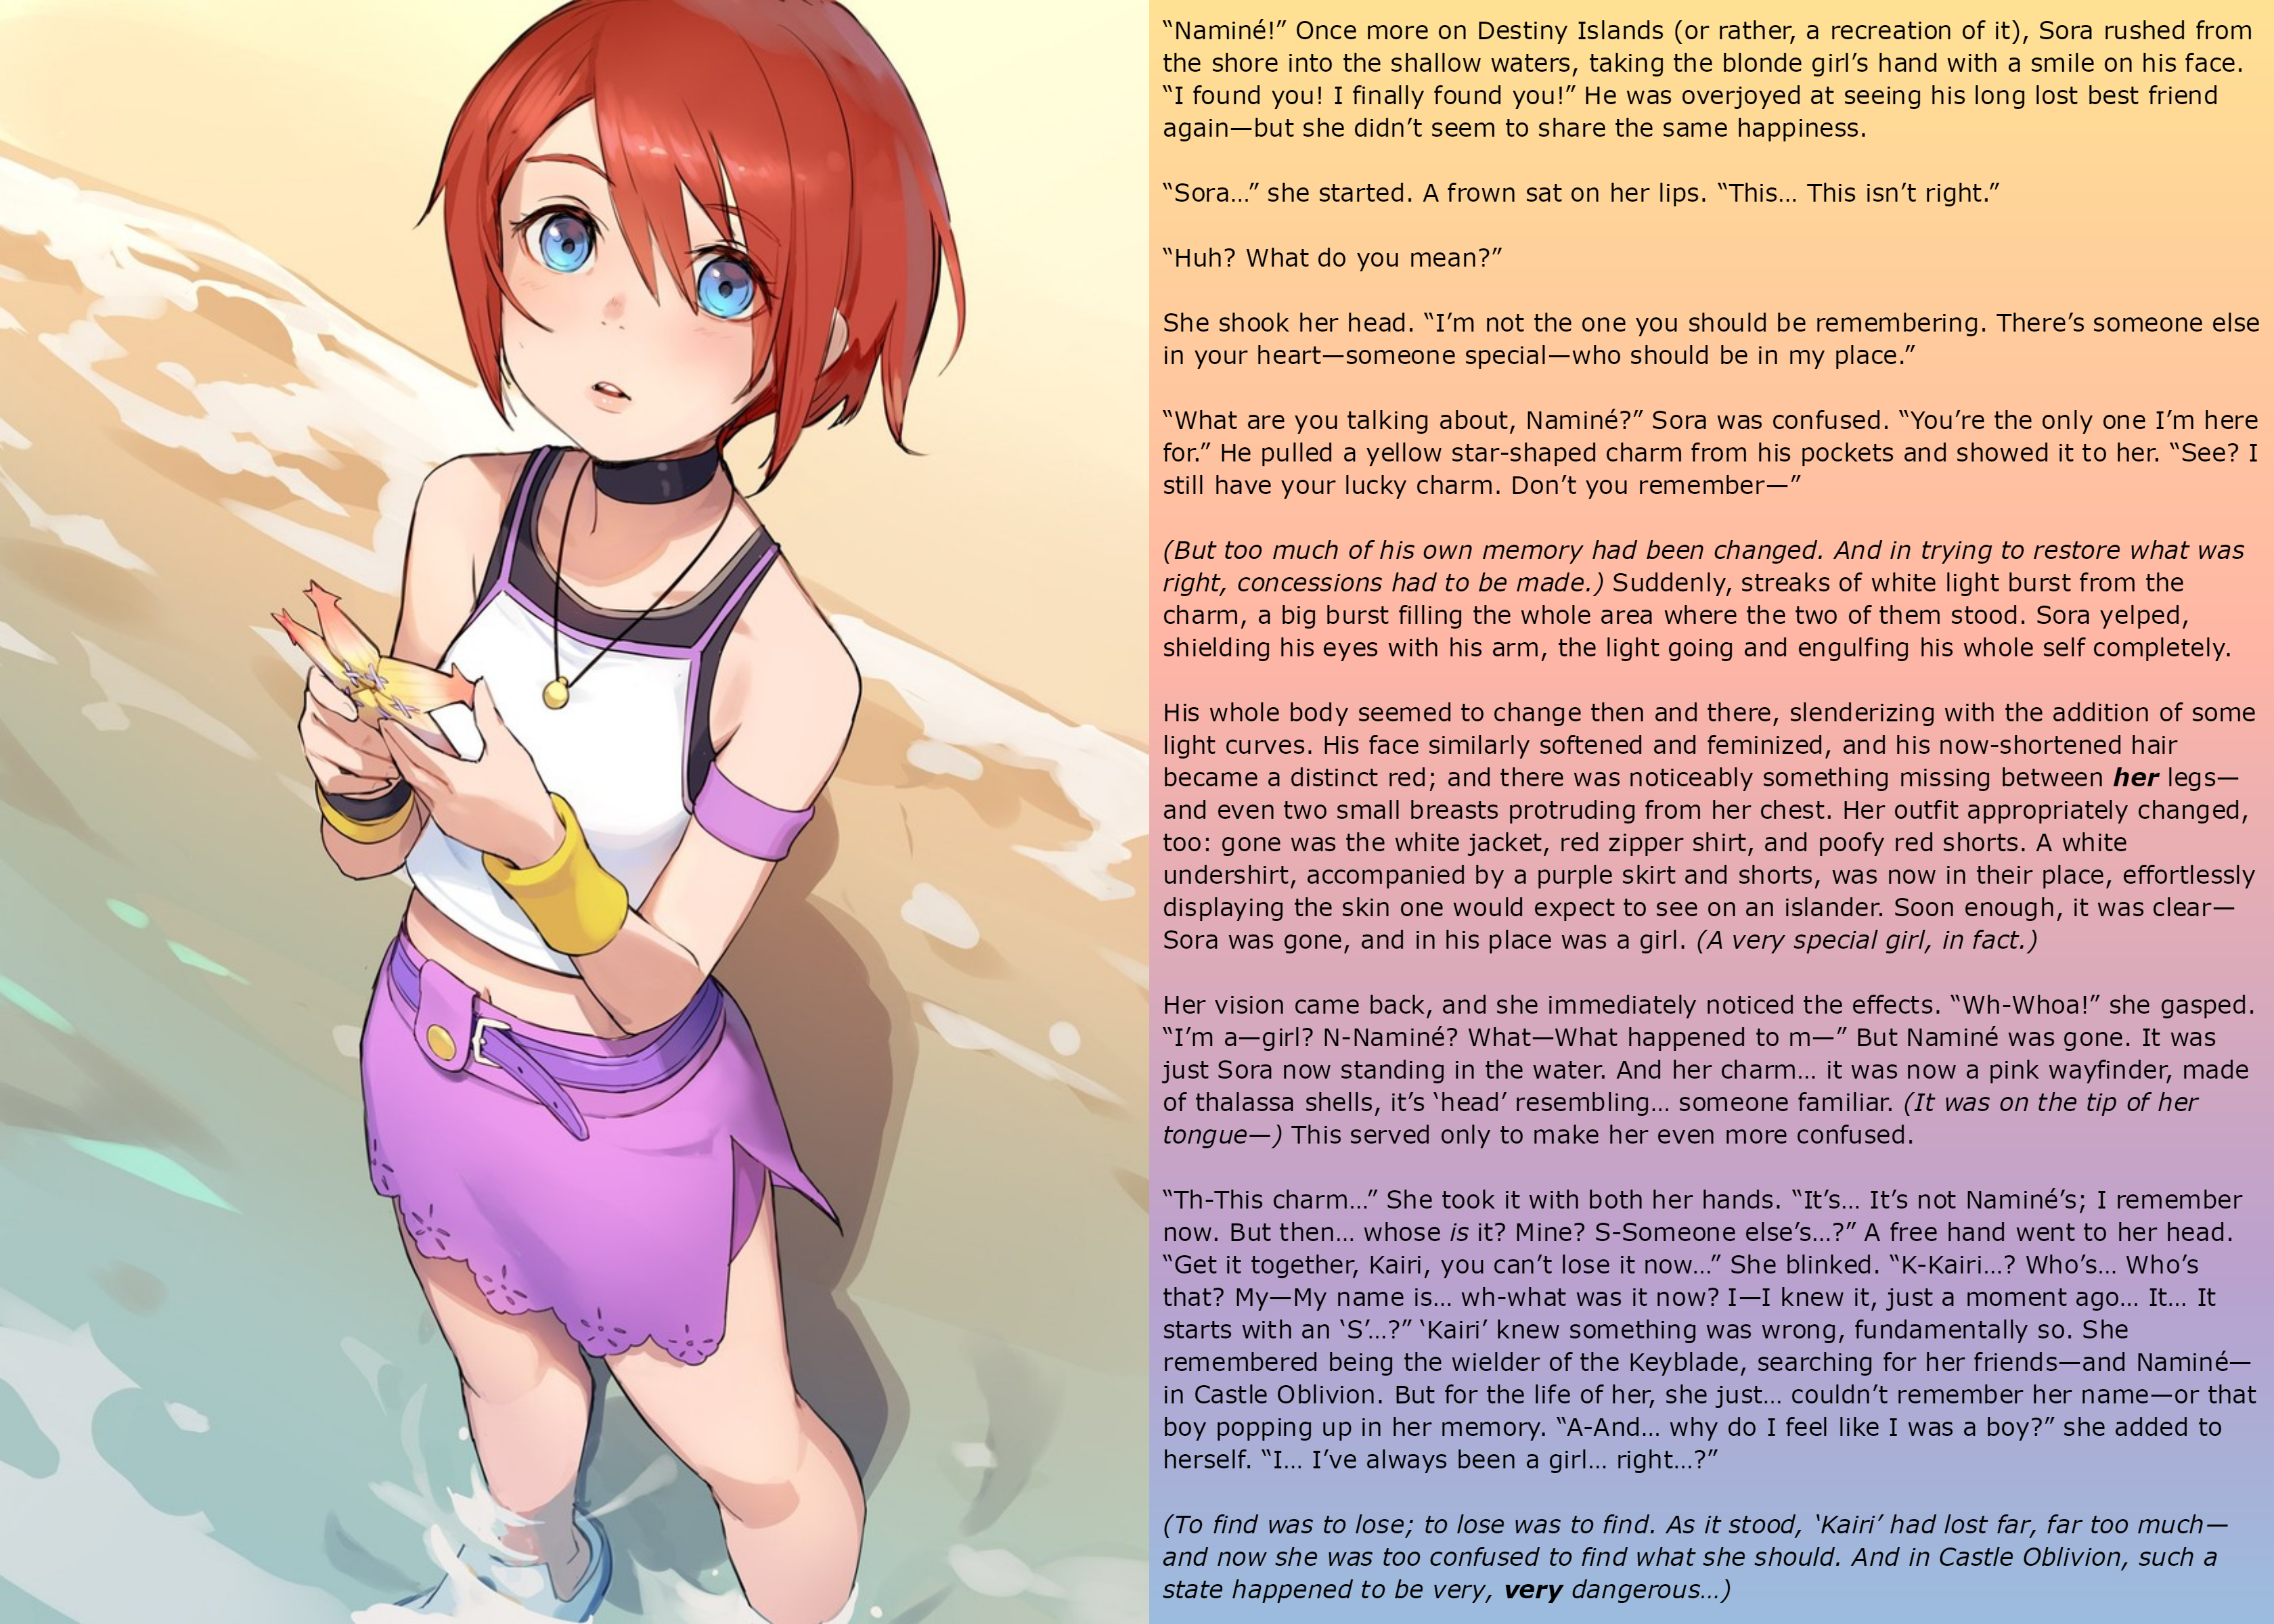 On The Edge Of Her Memory [sora To Kairi Tf Tg] By